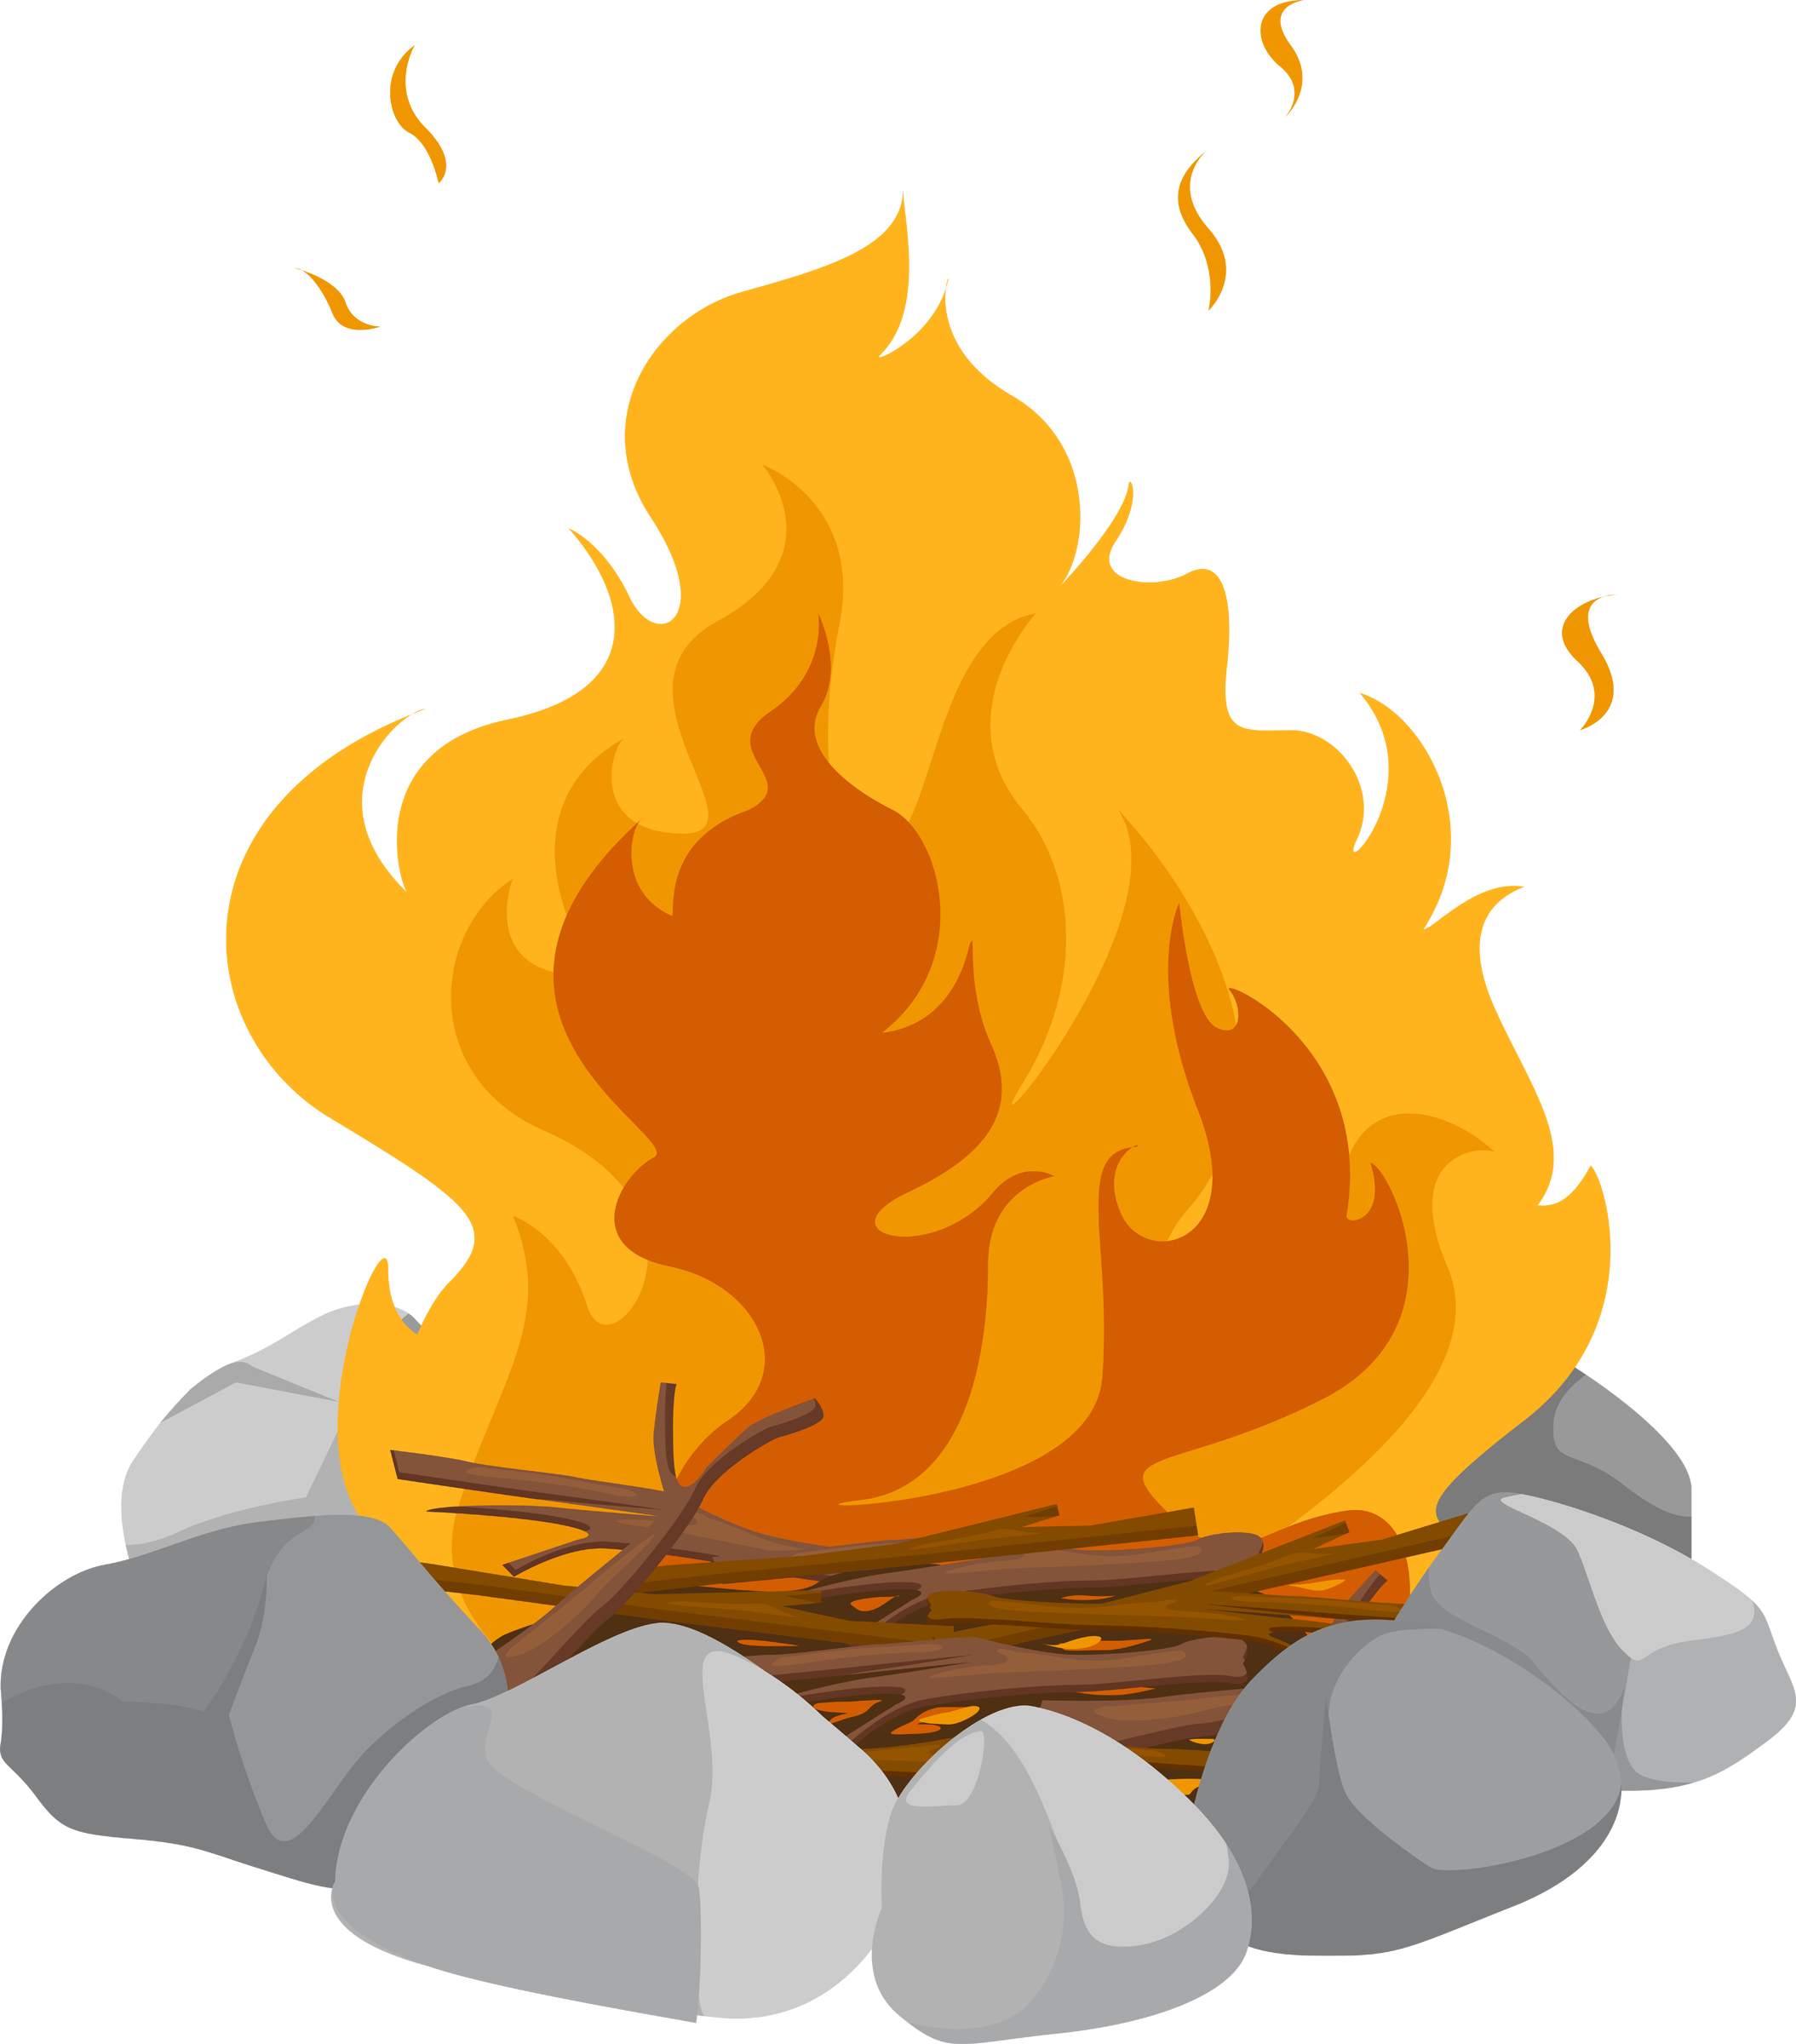 Campfire png images transparent. Smores clipart outdoor fun